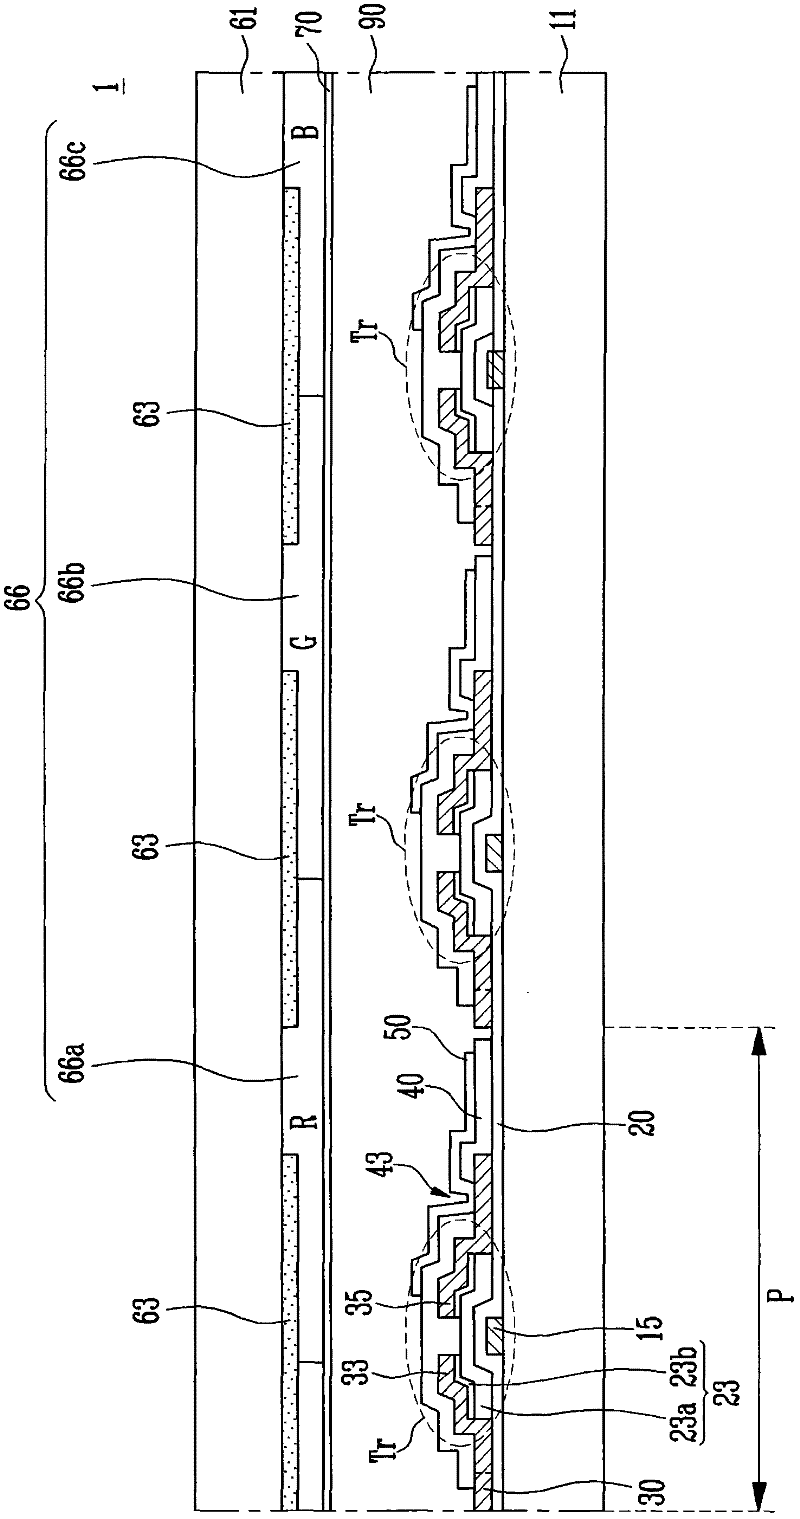 Liquid crystal display with built-in touch screen panel